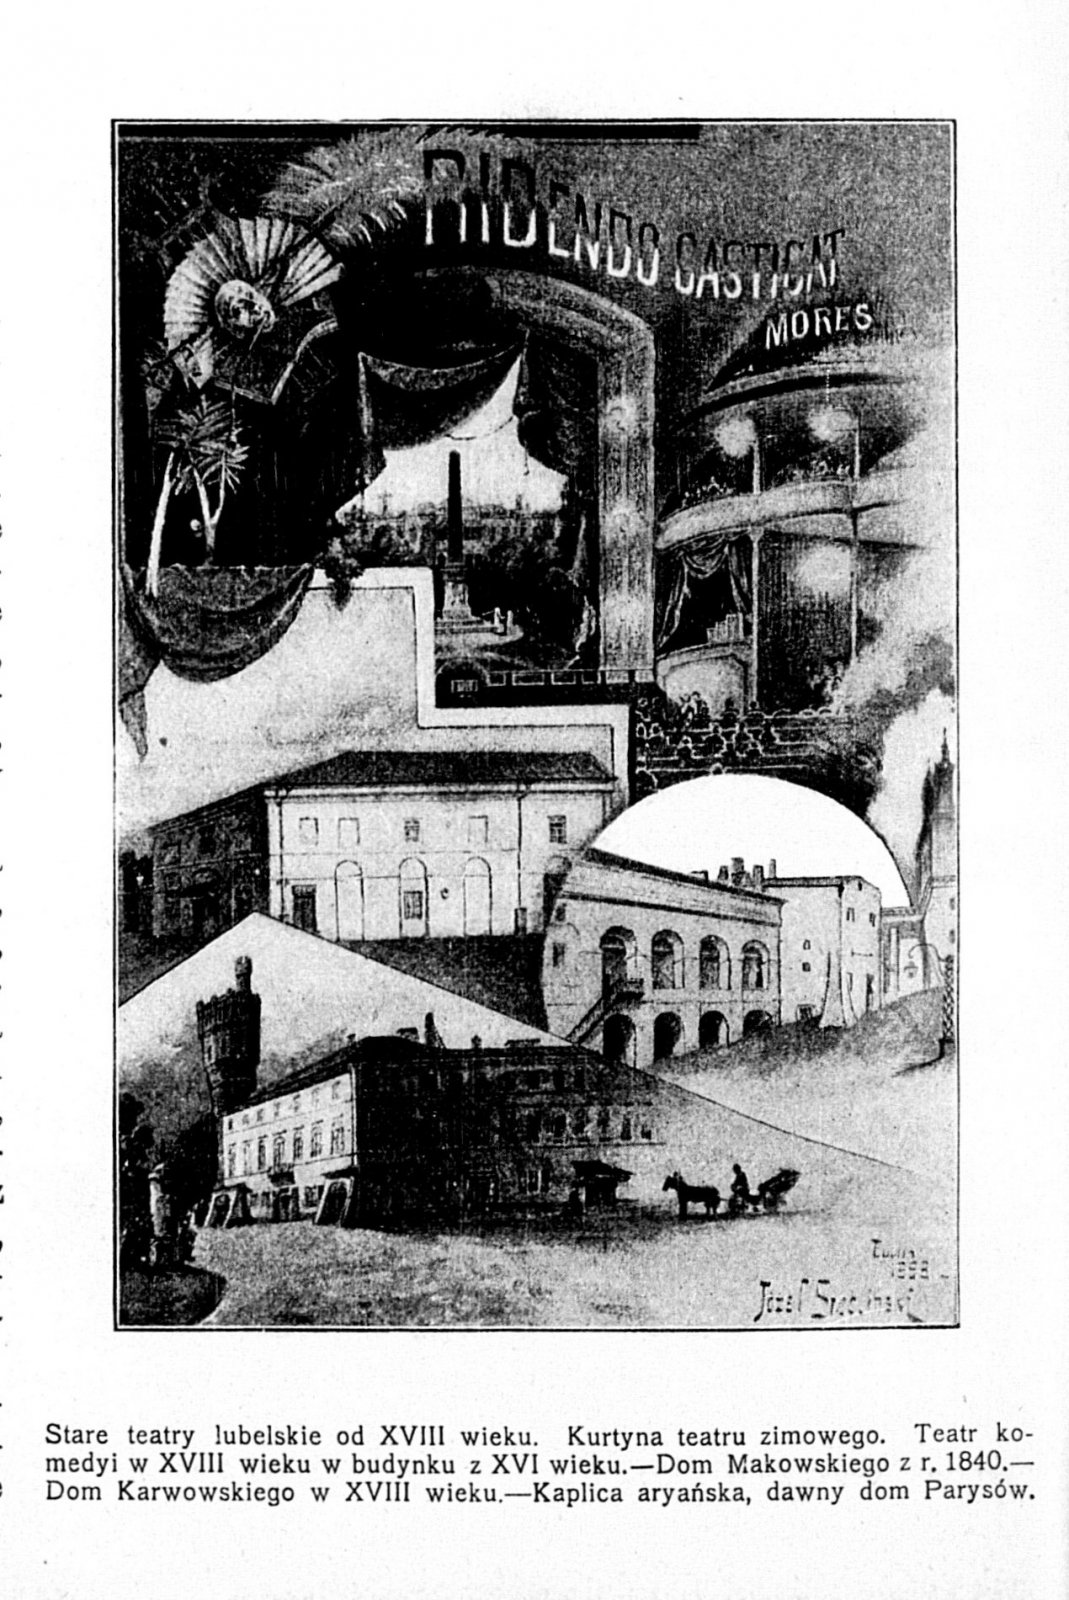 16. Newspaper illustration depicting old theatres of Lublin, the interior of the Makowski Theatre seen in the upper part, and the entire building in the lower part, “Biesiada Literacka” 1901.